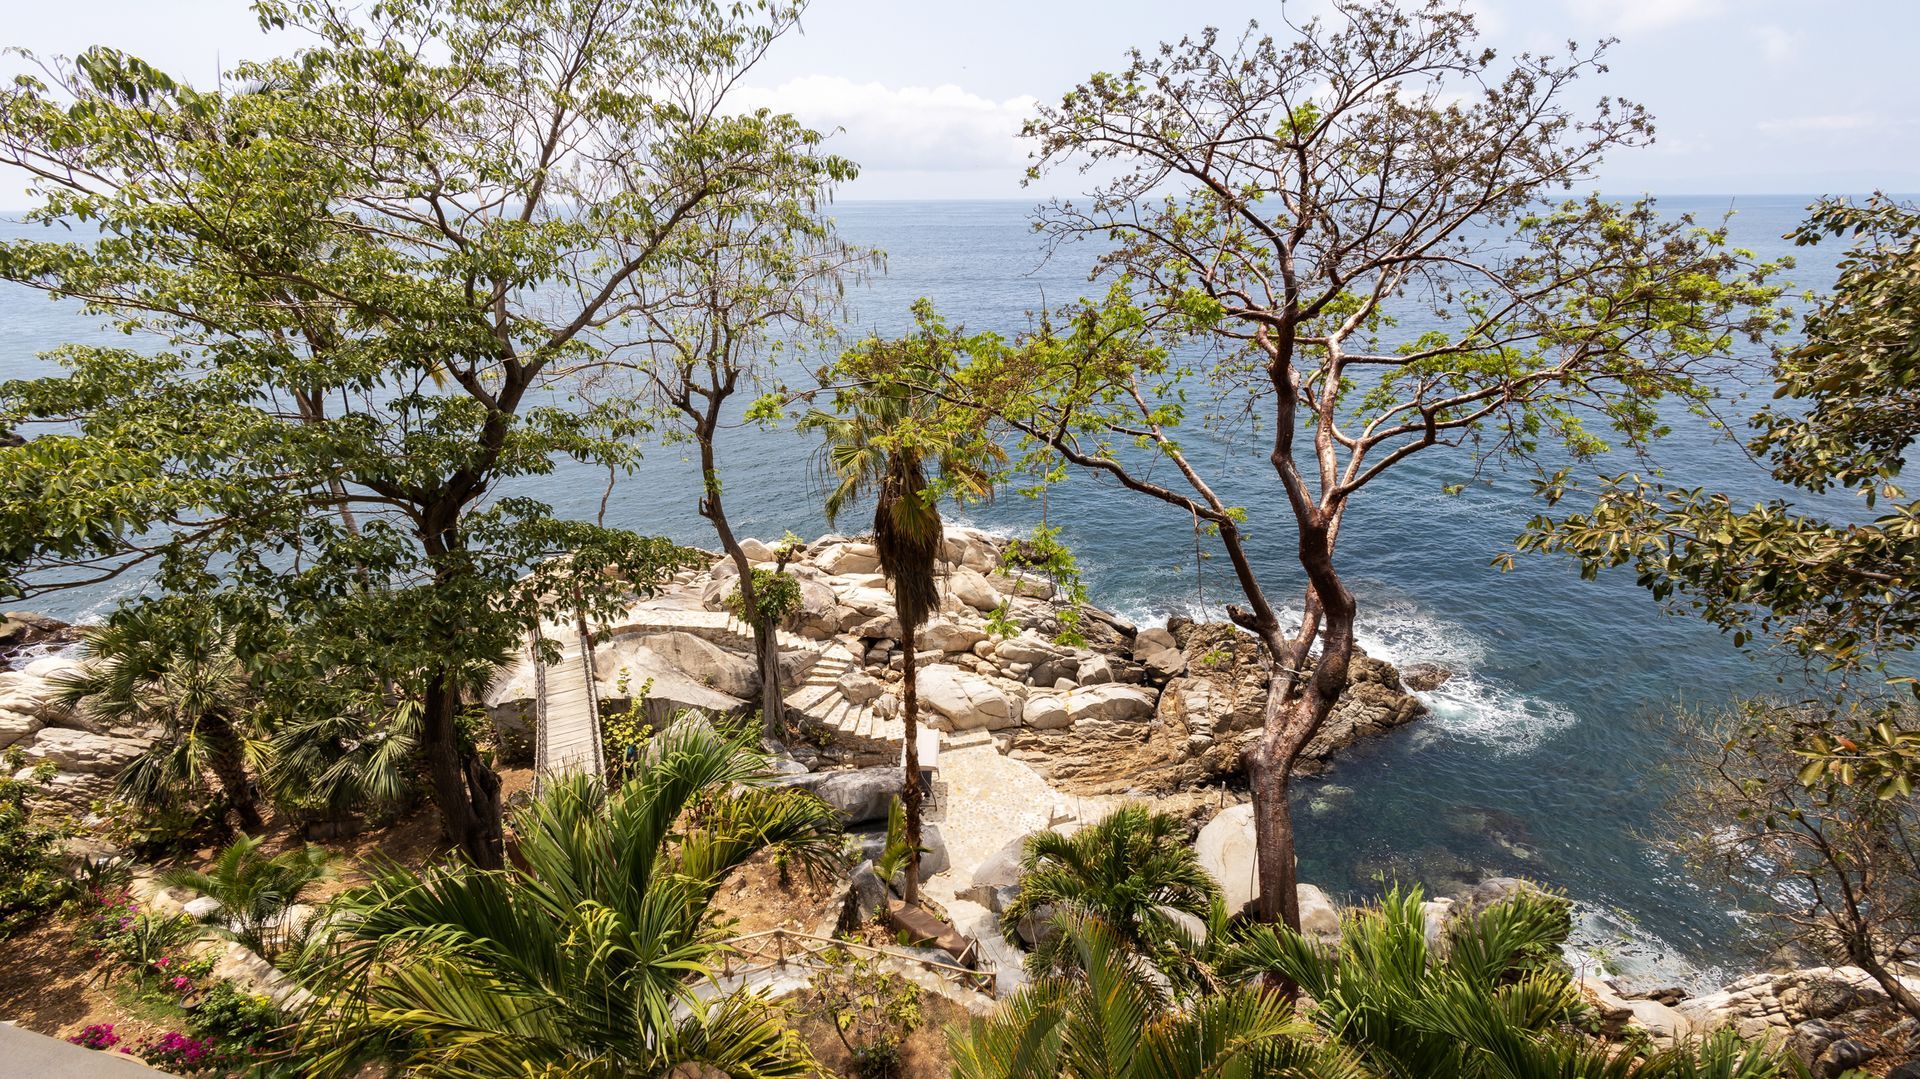 a view of a cliff overlooking the ocean with trees in the foreground